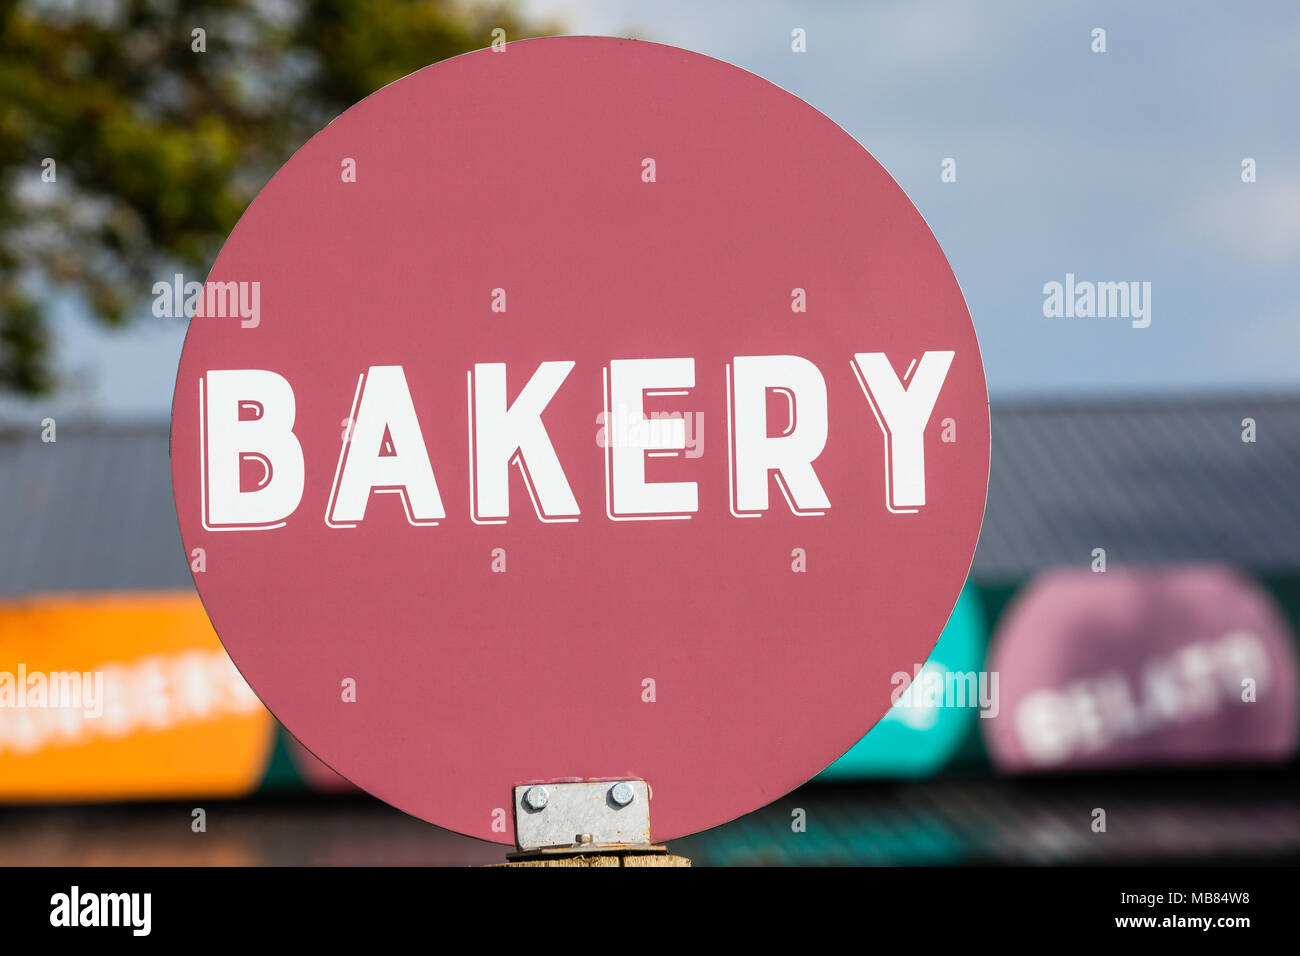 Bakery word white letters on maroon round disk sign board outside food store. Stock Photo